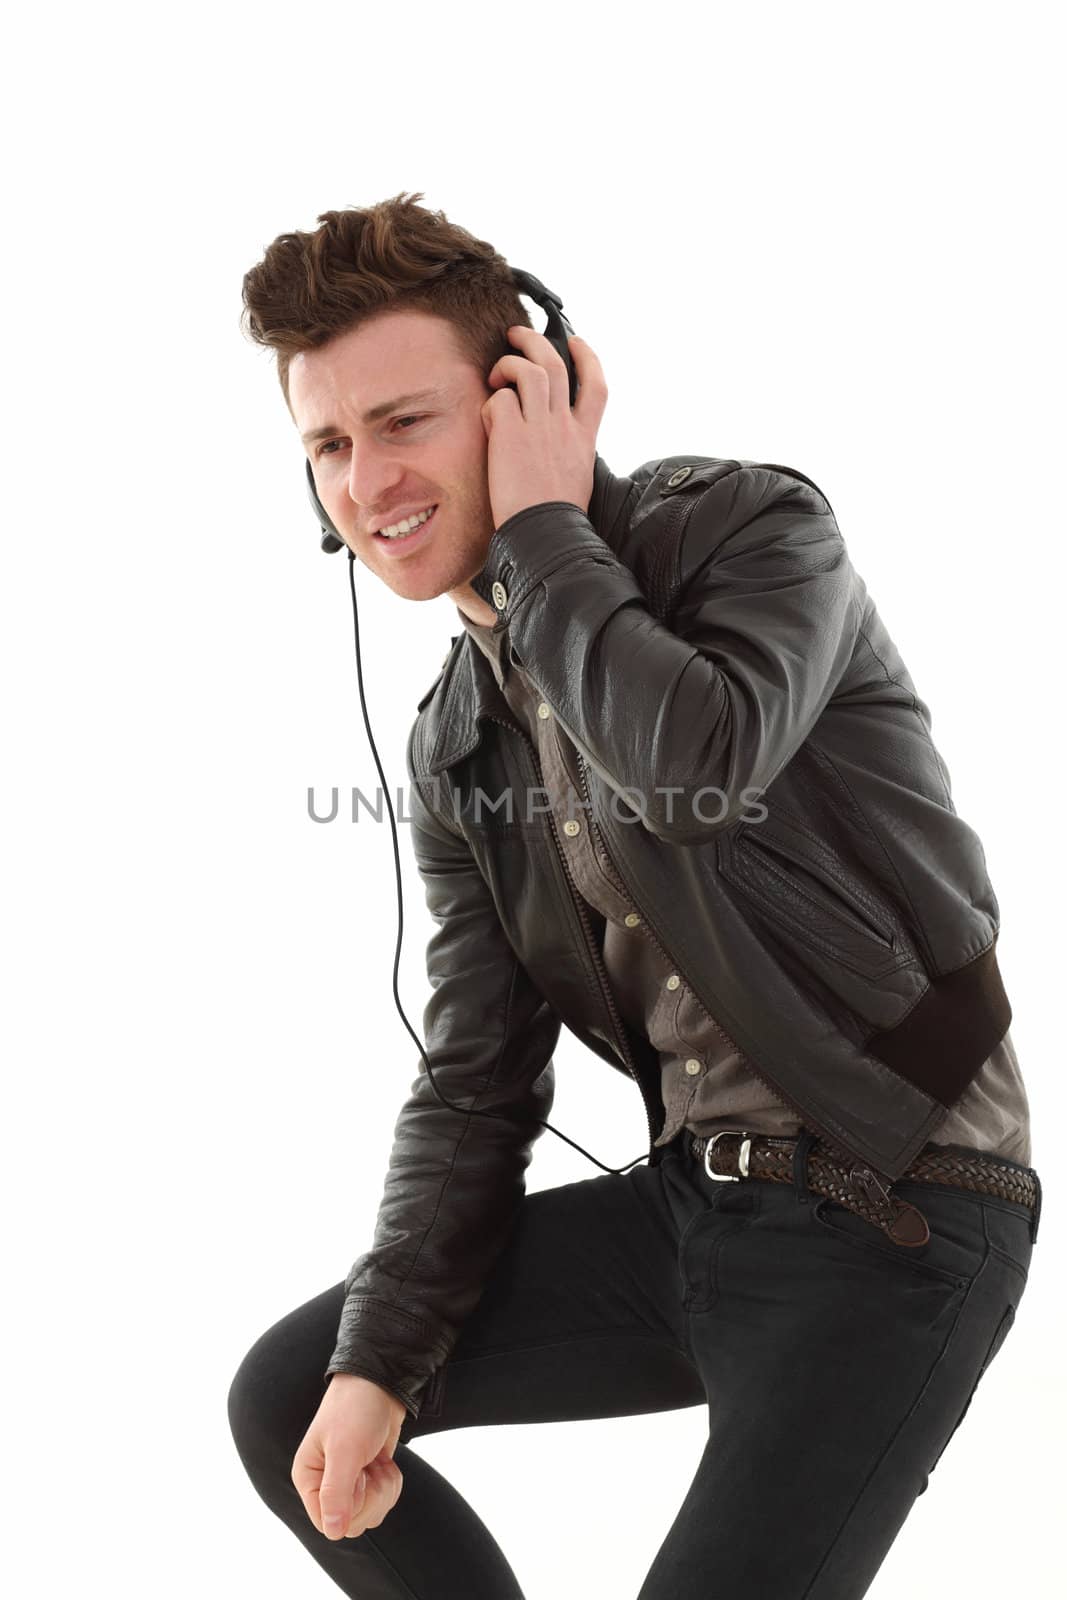 Young adult male listening music by shamtor